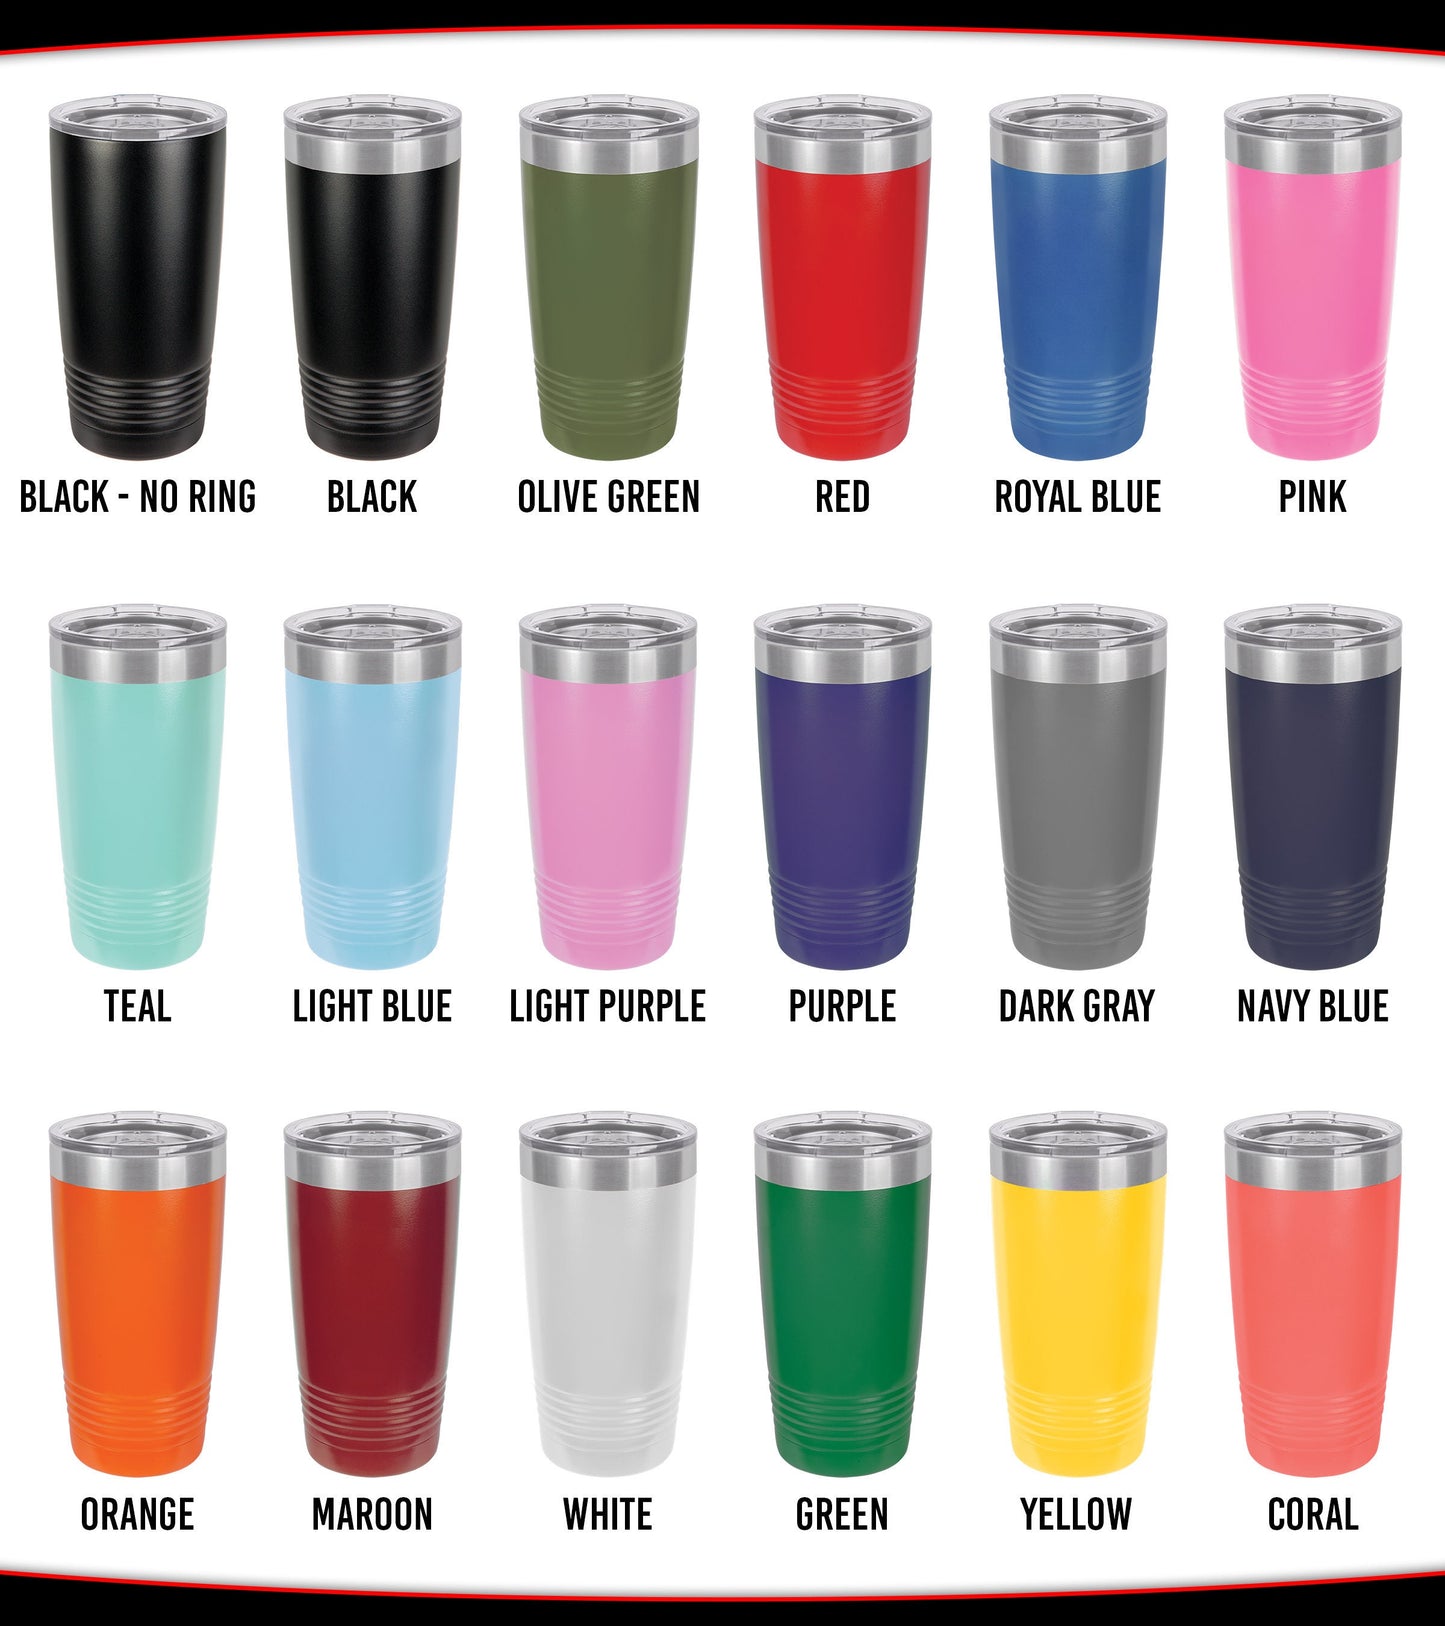 Personalized Lacrosse Coach Tumbler 20oz. Stainless Steel Tumbler